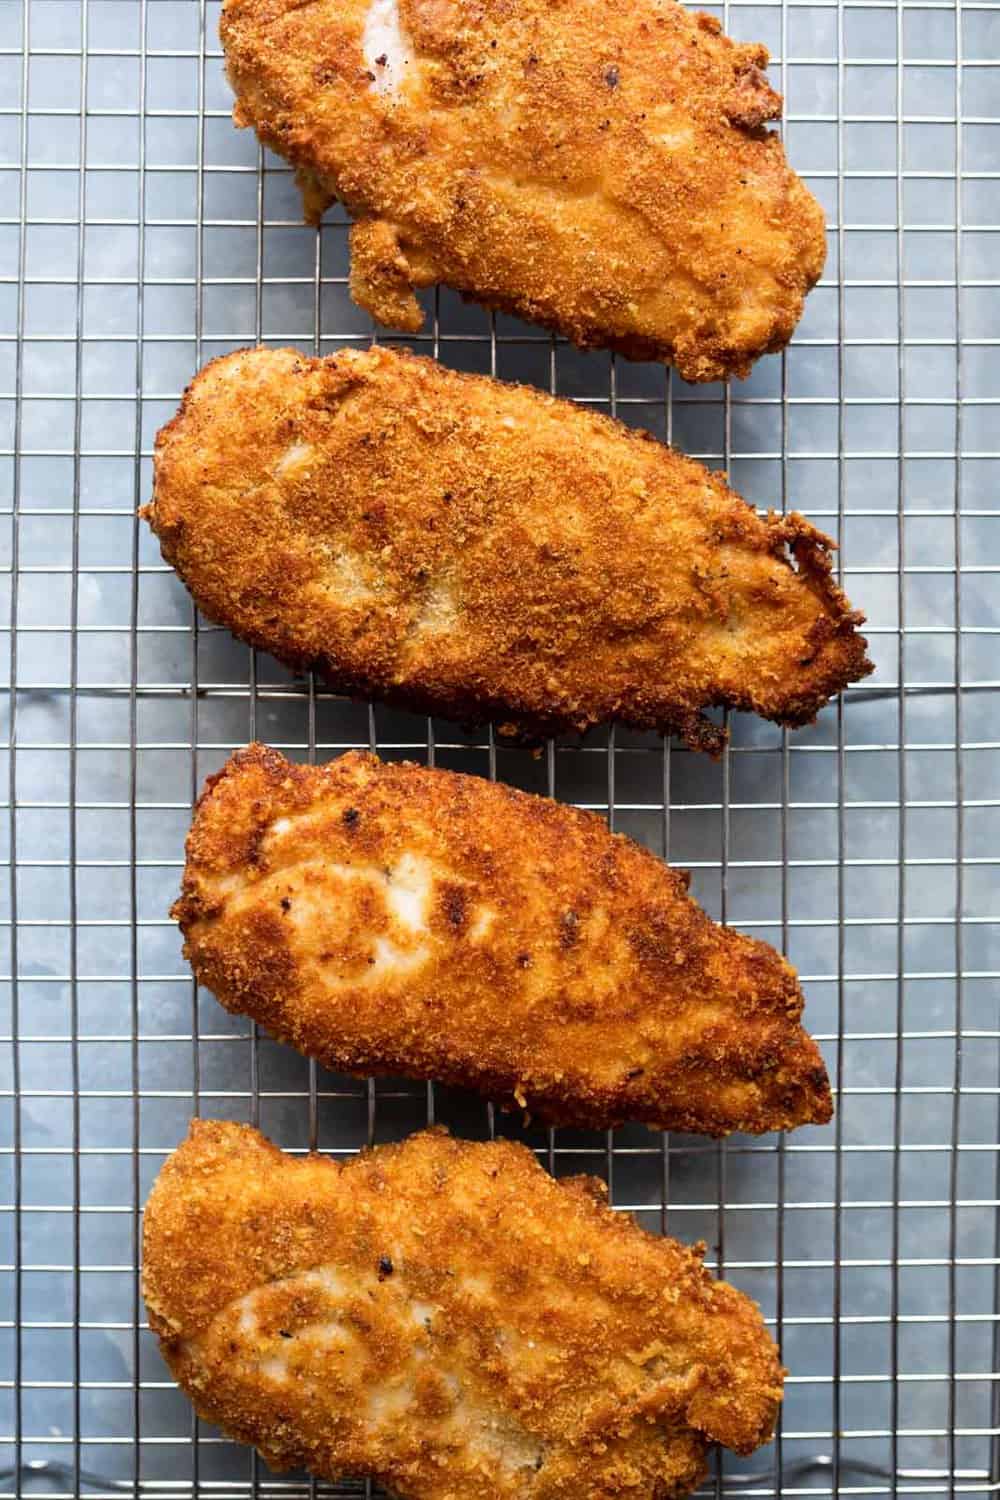 Fried chicken breasts on a wire rack